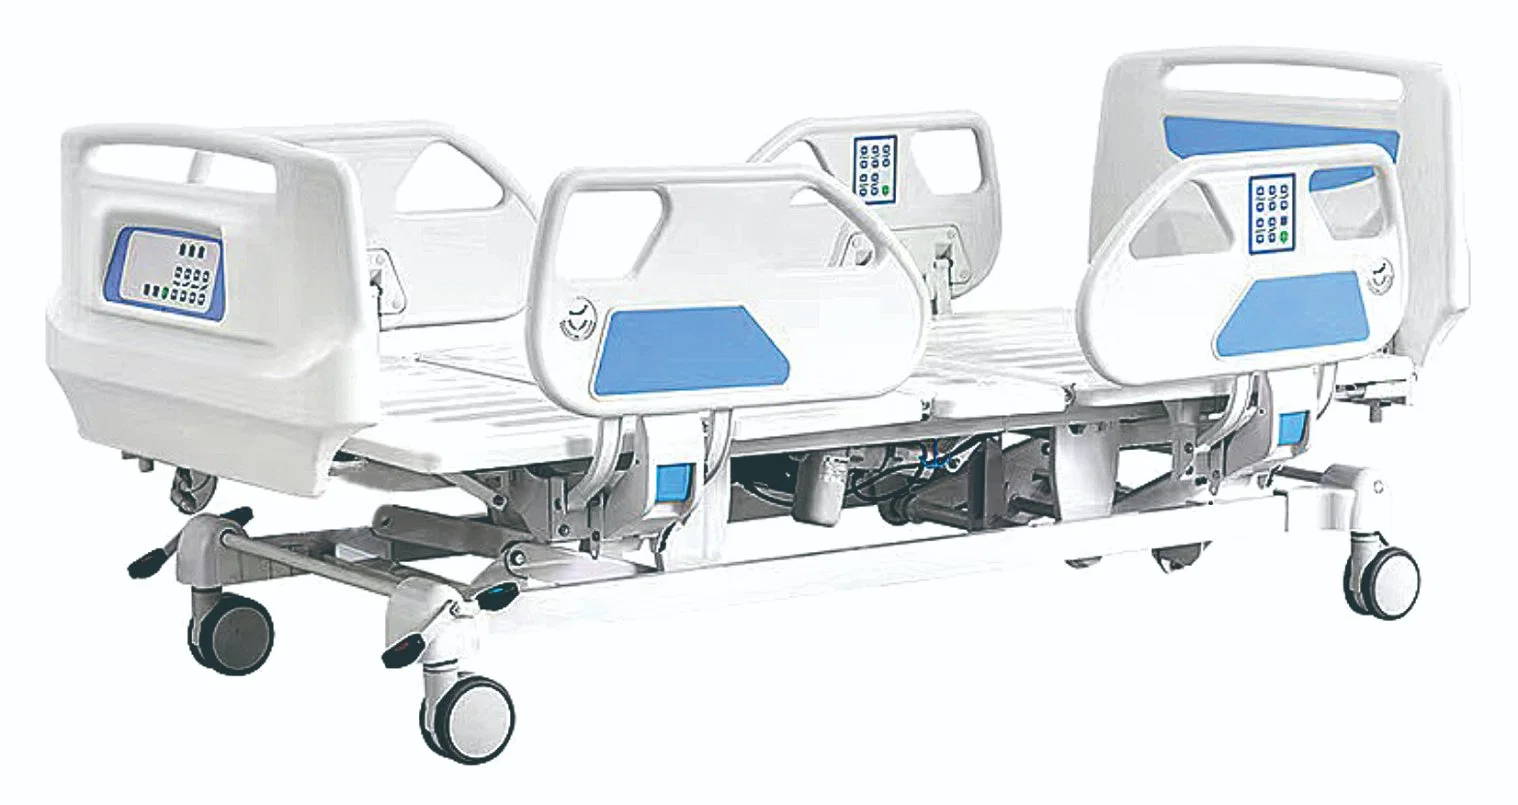 5 Function ICU Electric Hospital Bed Equipment Surgical Medical Multifunction Shuaner